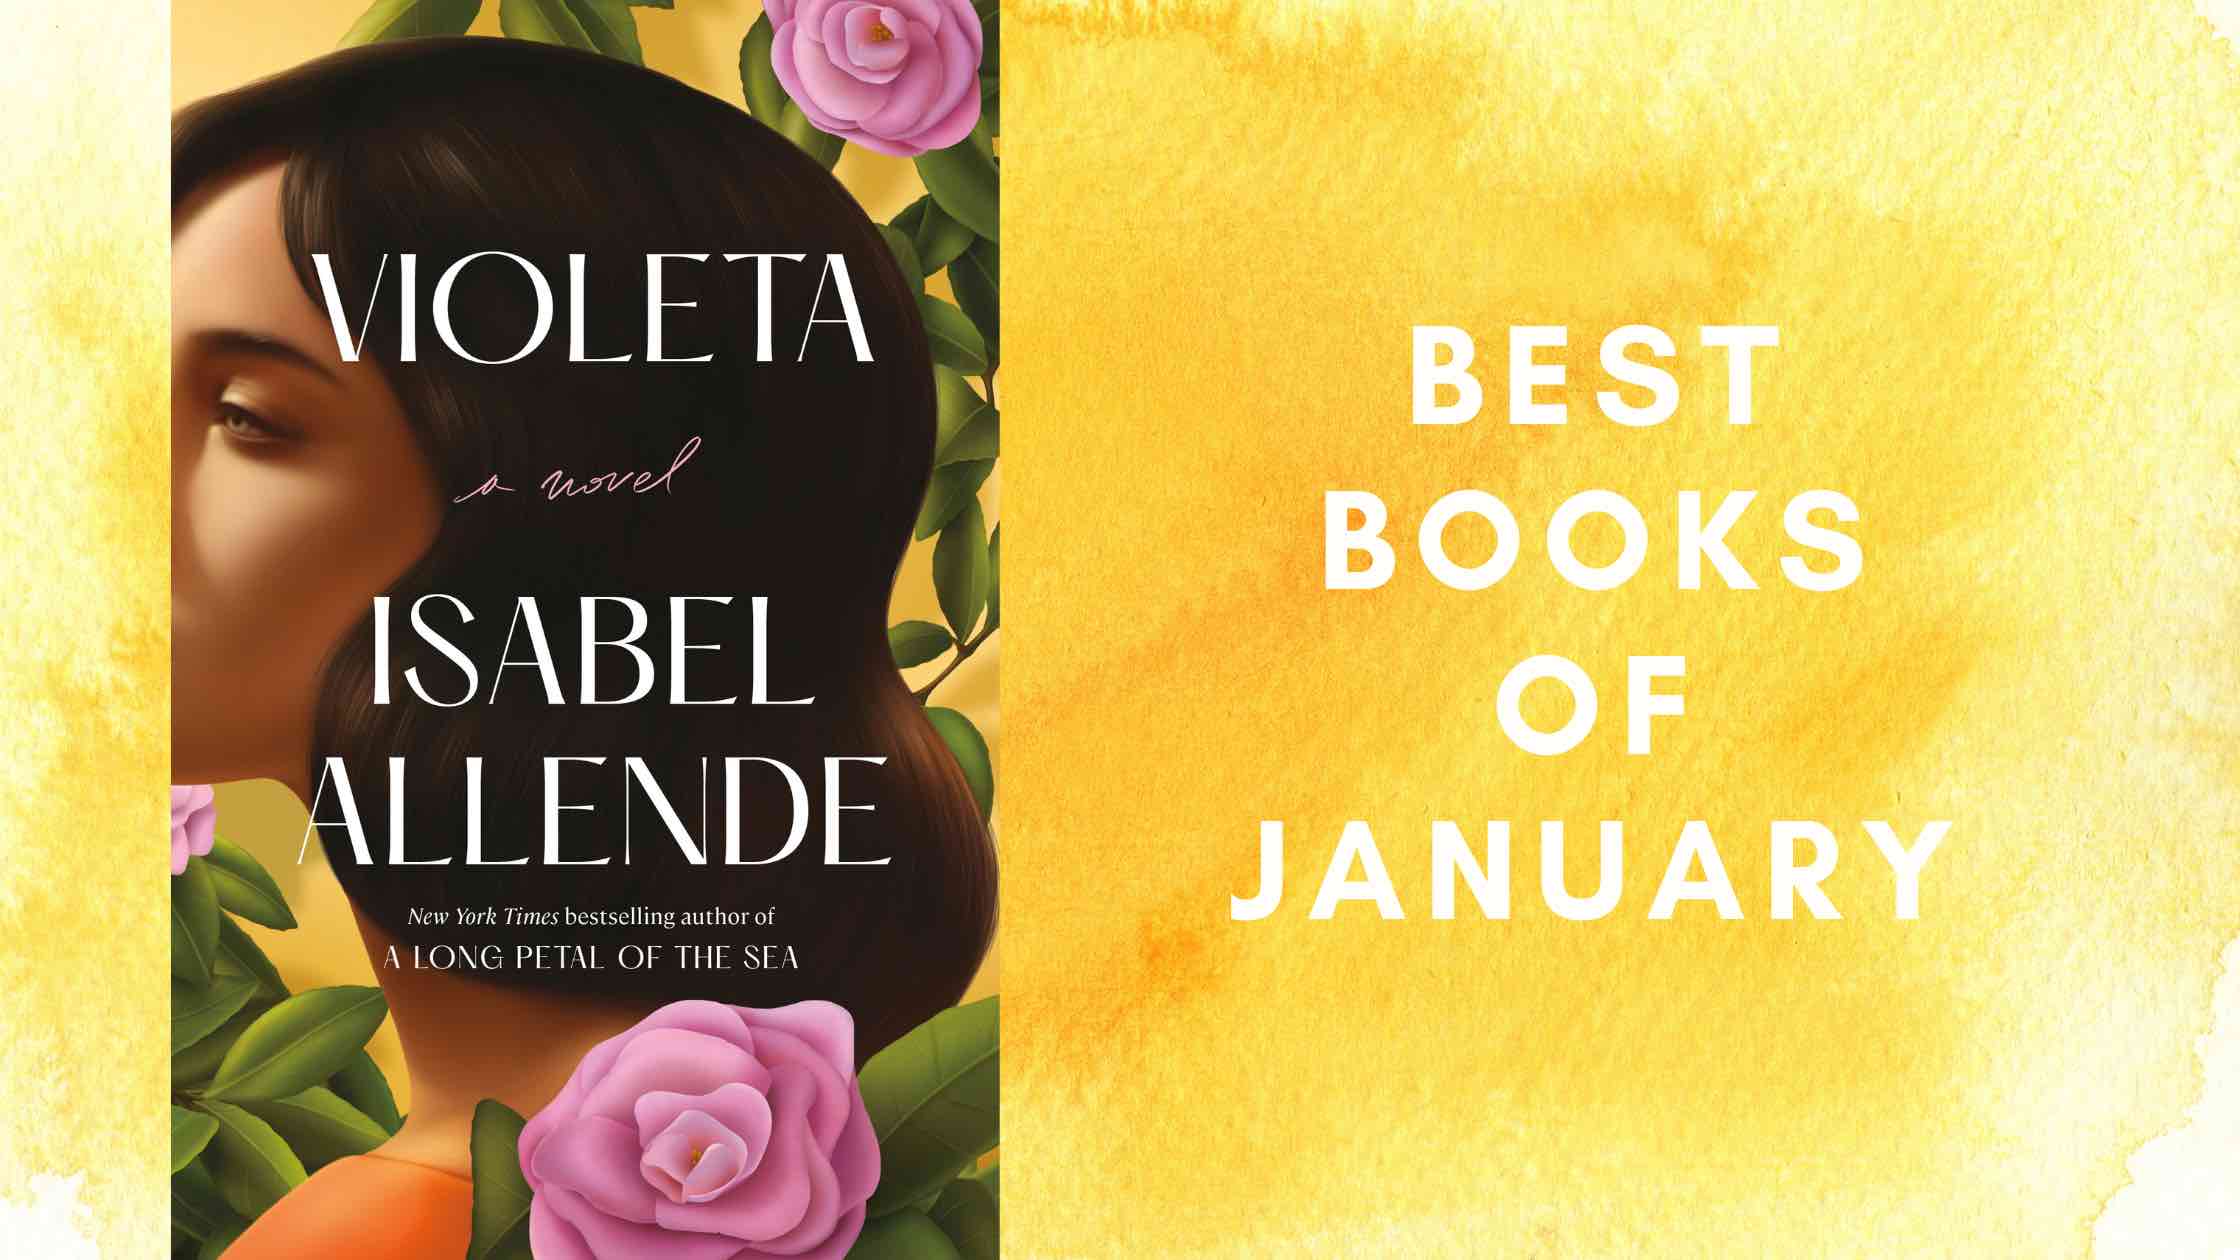 The most anticipated book of January includes Violeta.